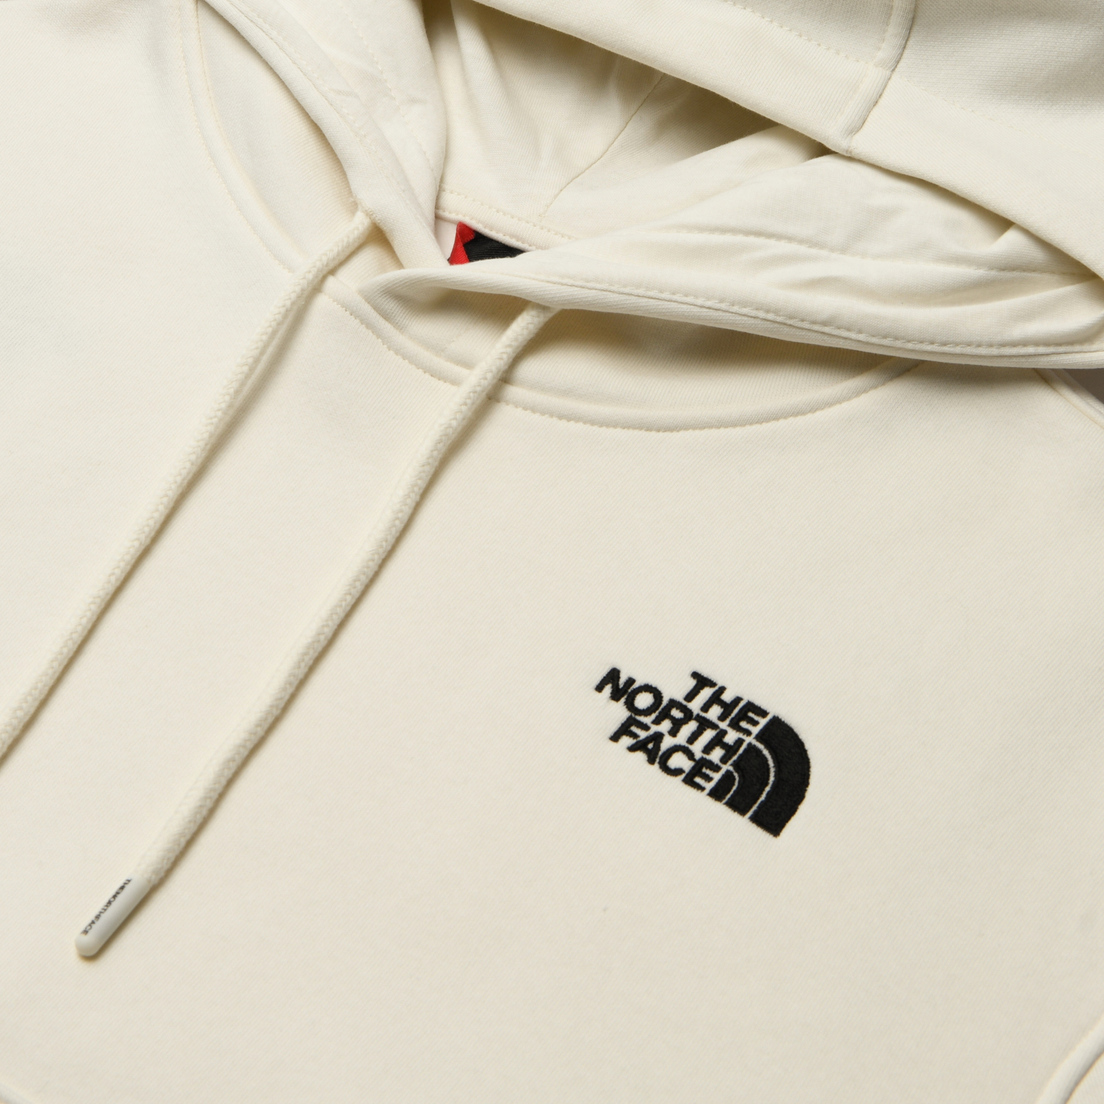 The North Face Женская толстовка Essential Hoodie